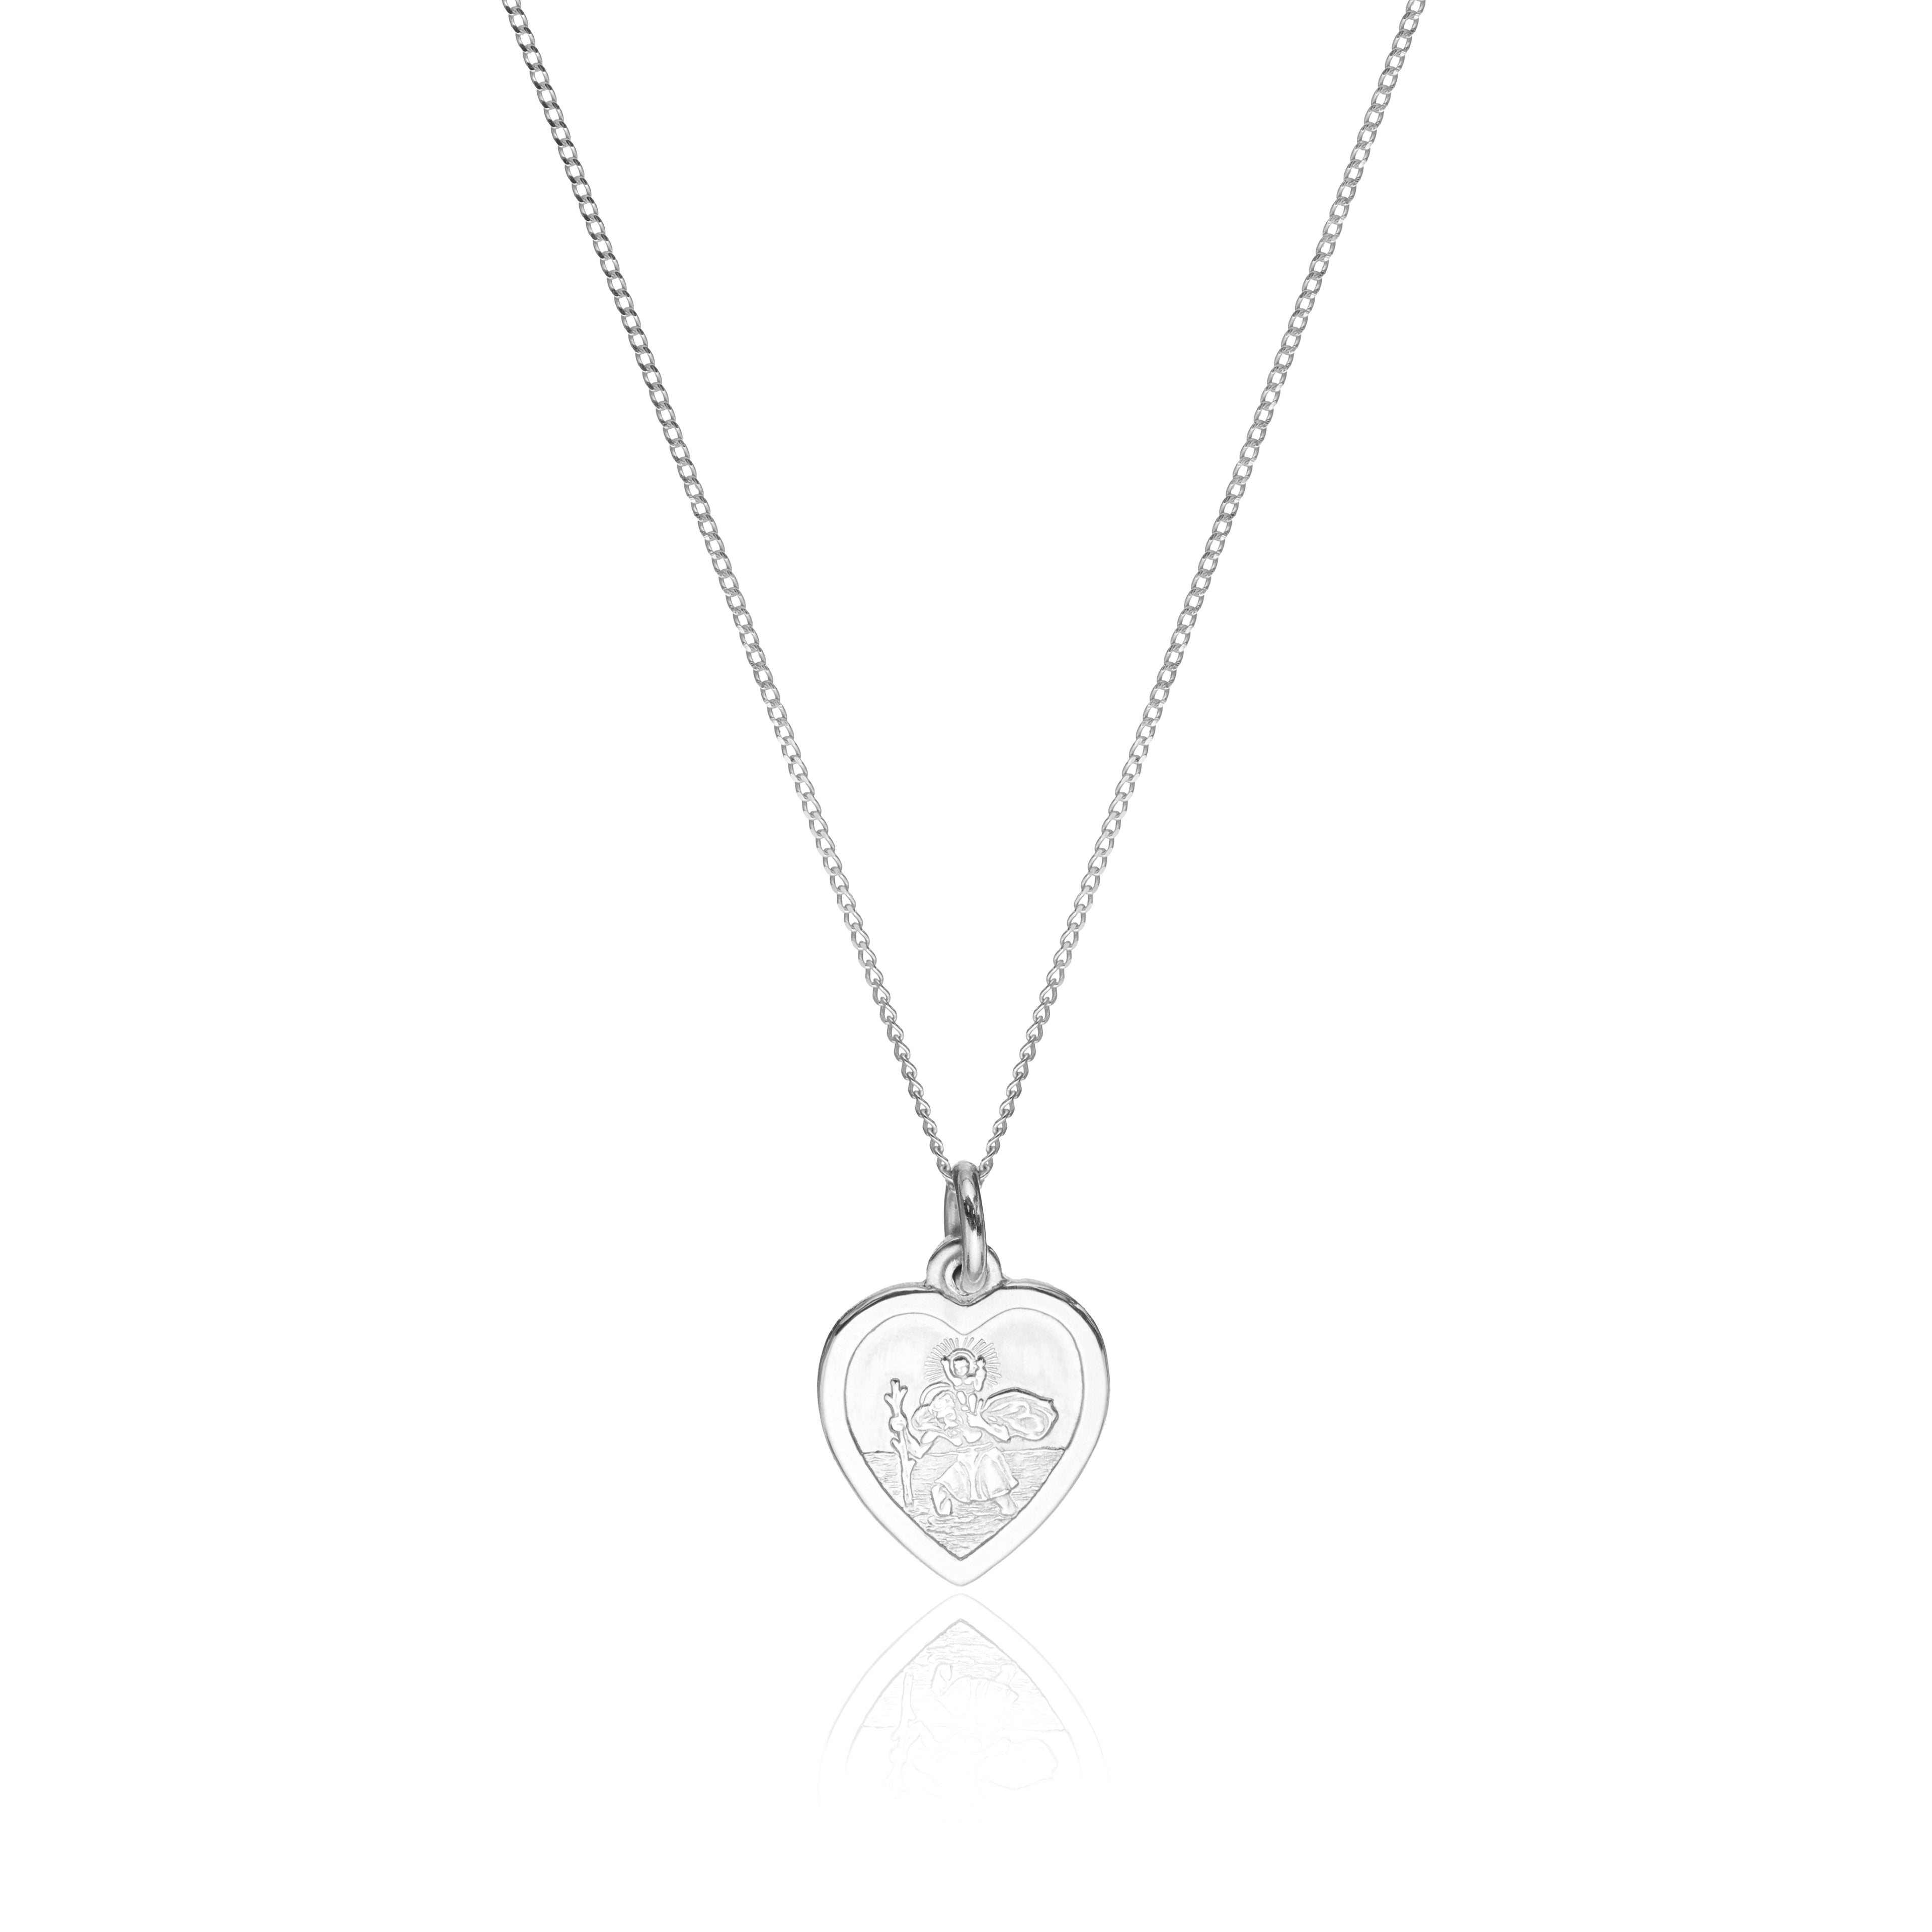 Silver small heart st christopher necklace on a white background